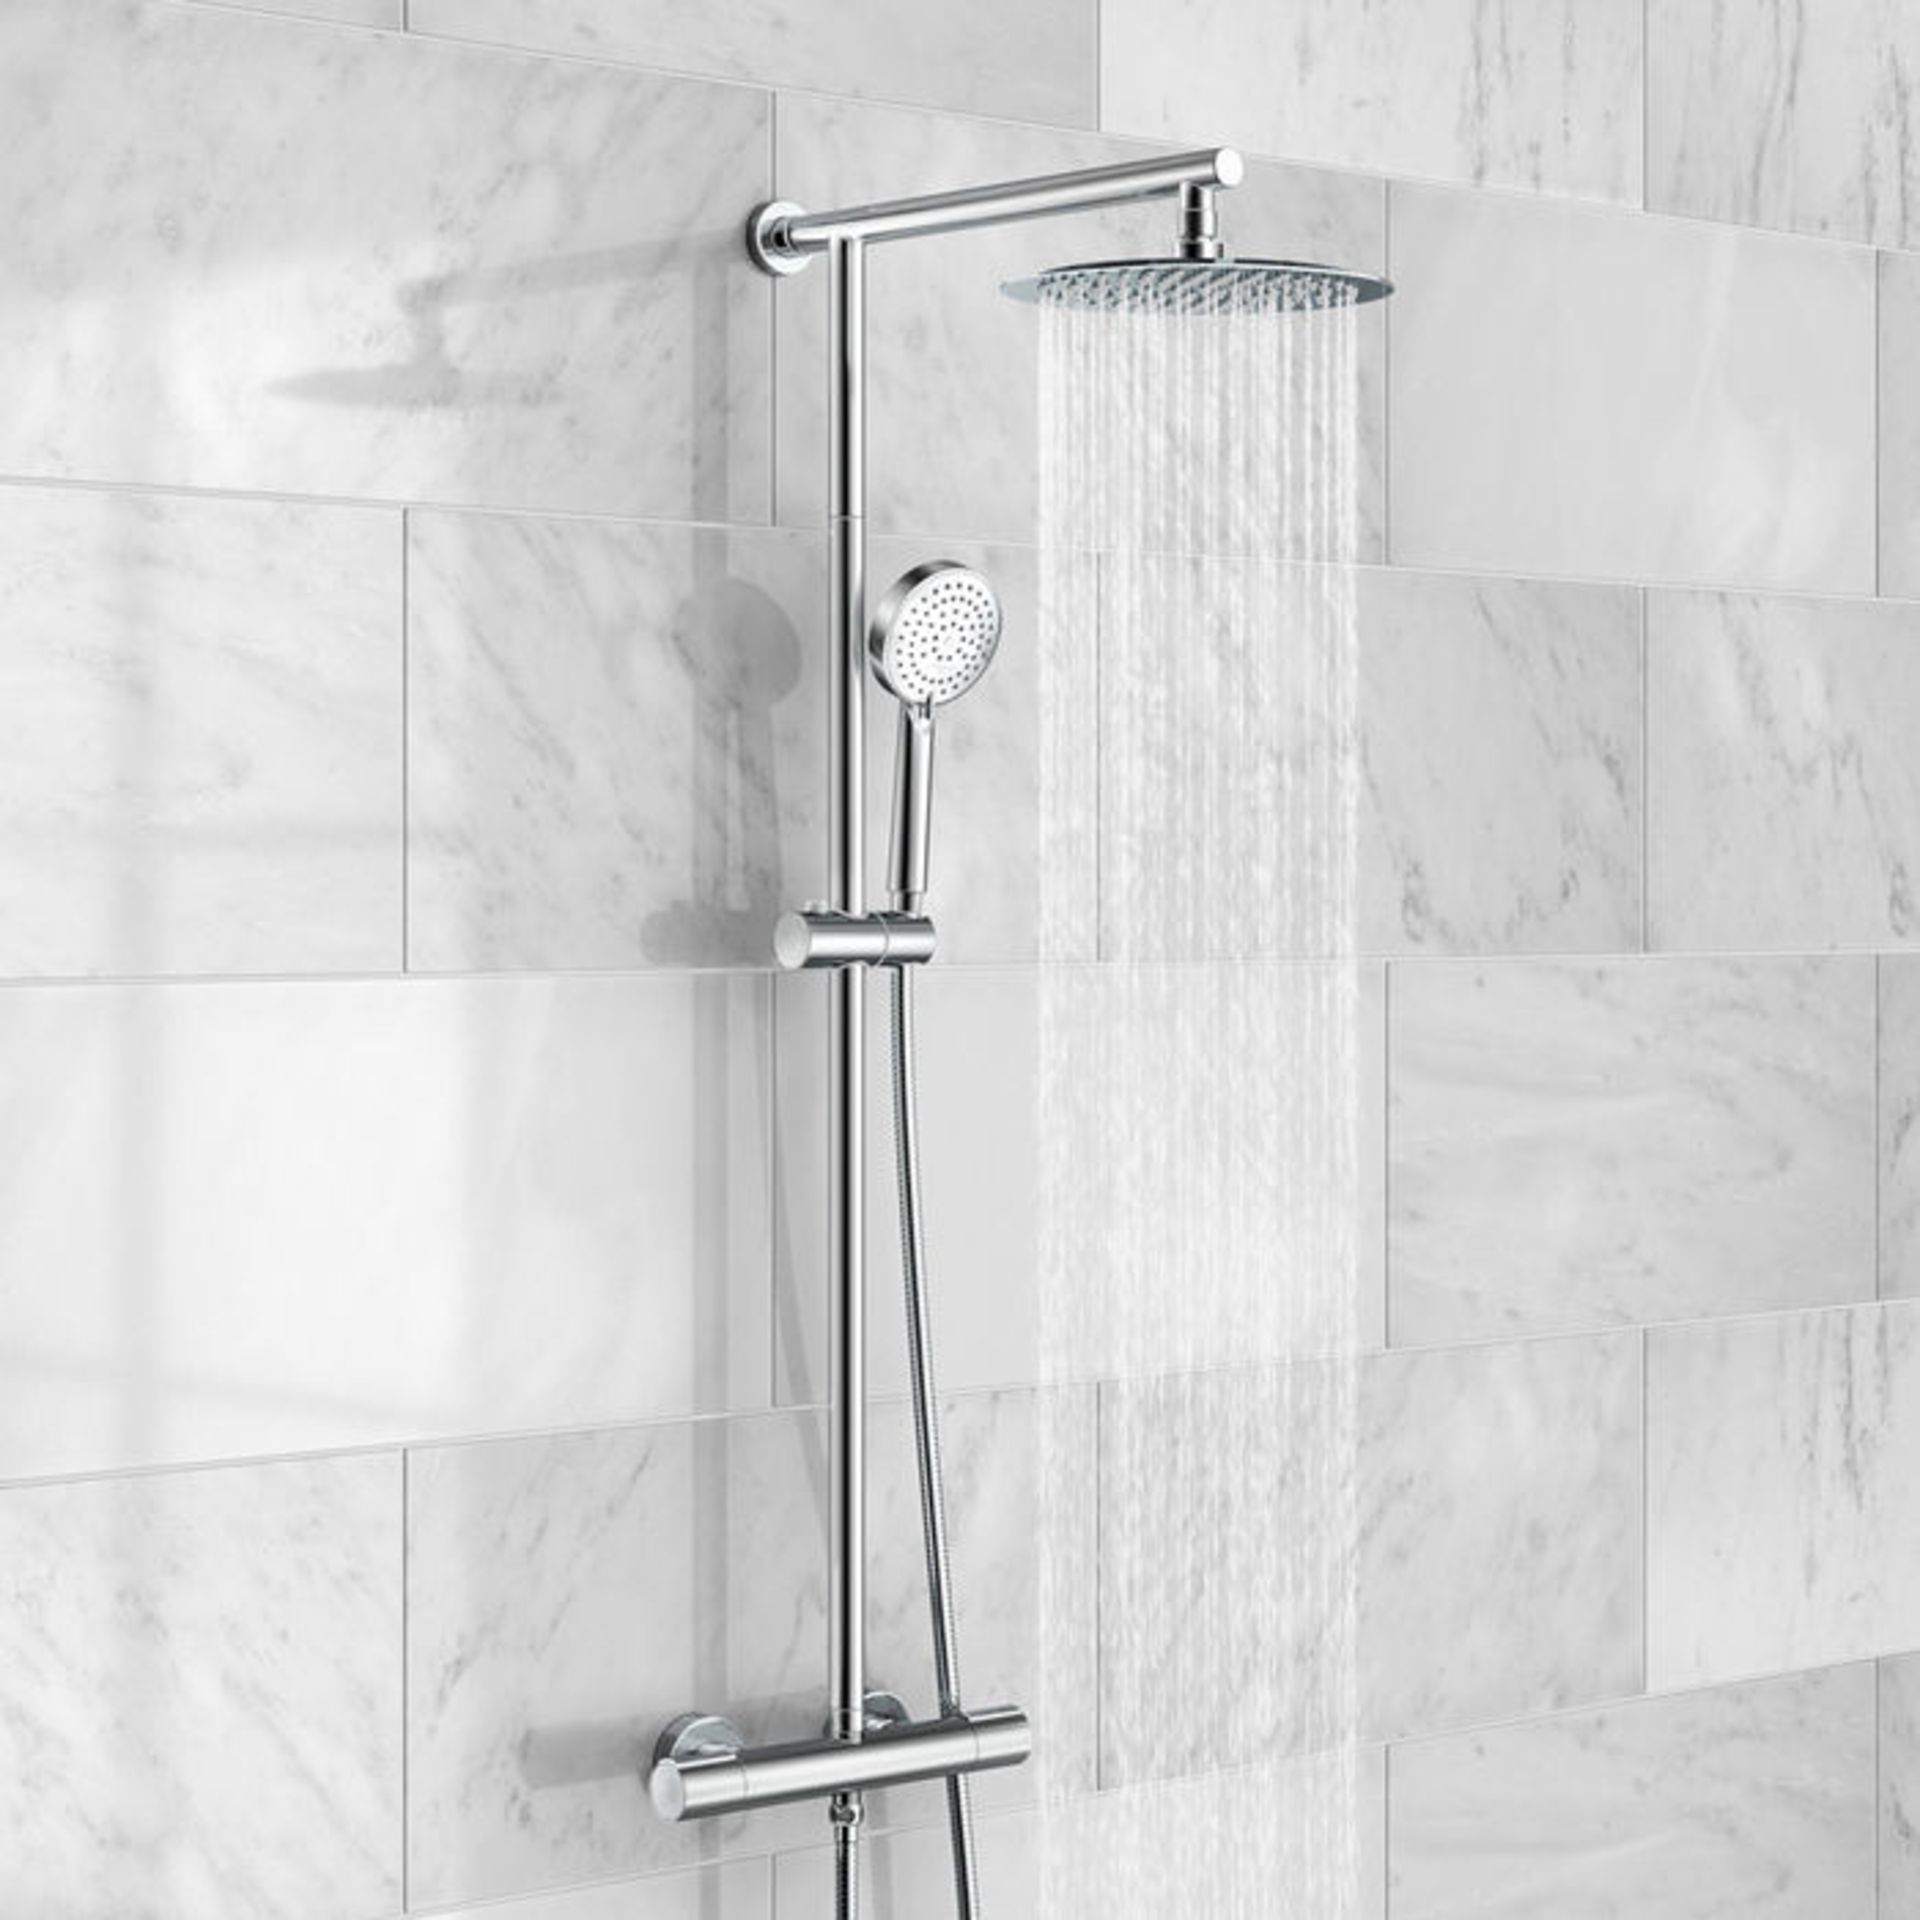 (AL28) Round Exposed Thermostatic Shower Kit & Large Head. ii Luxurious larger head for a more